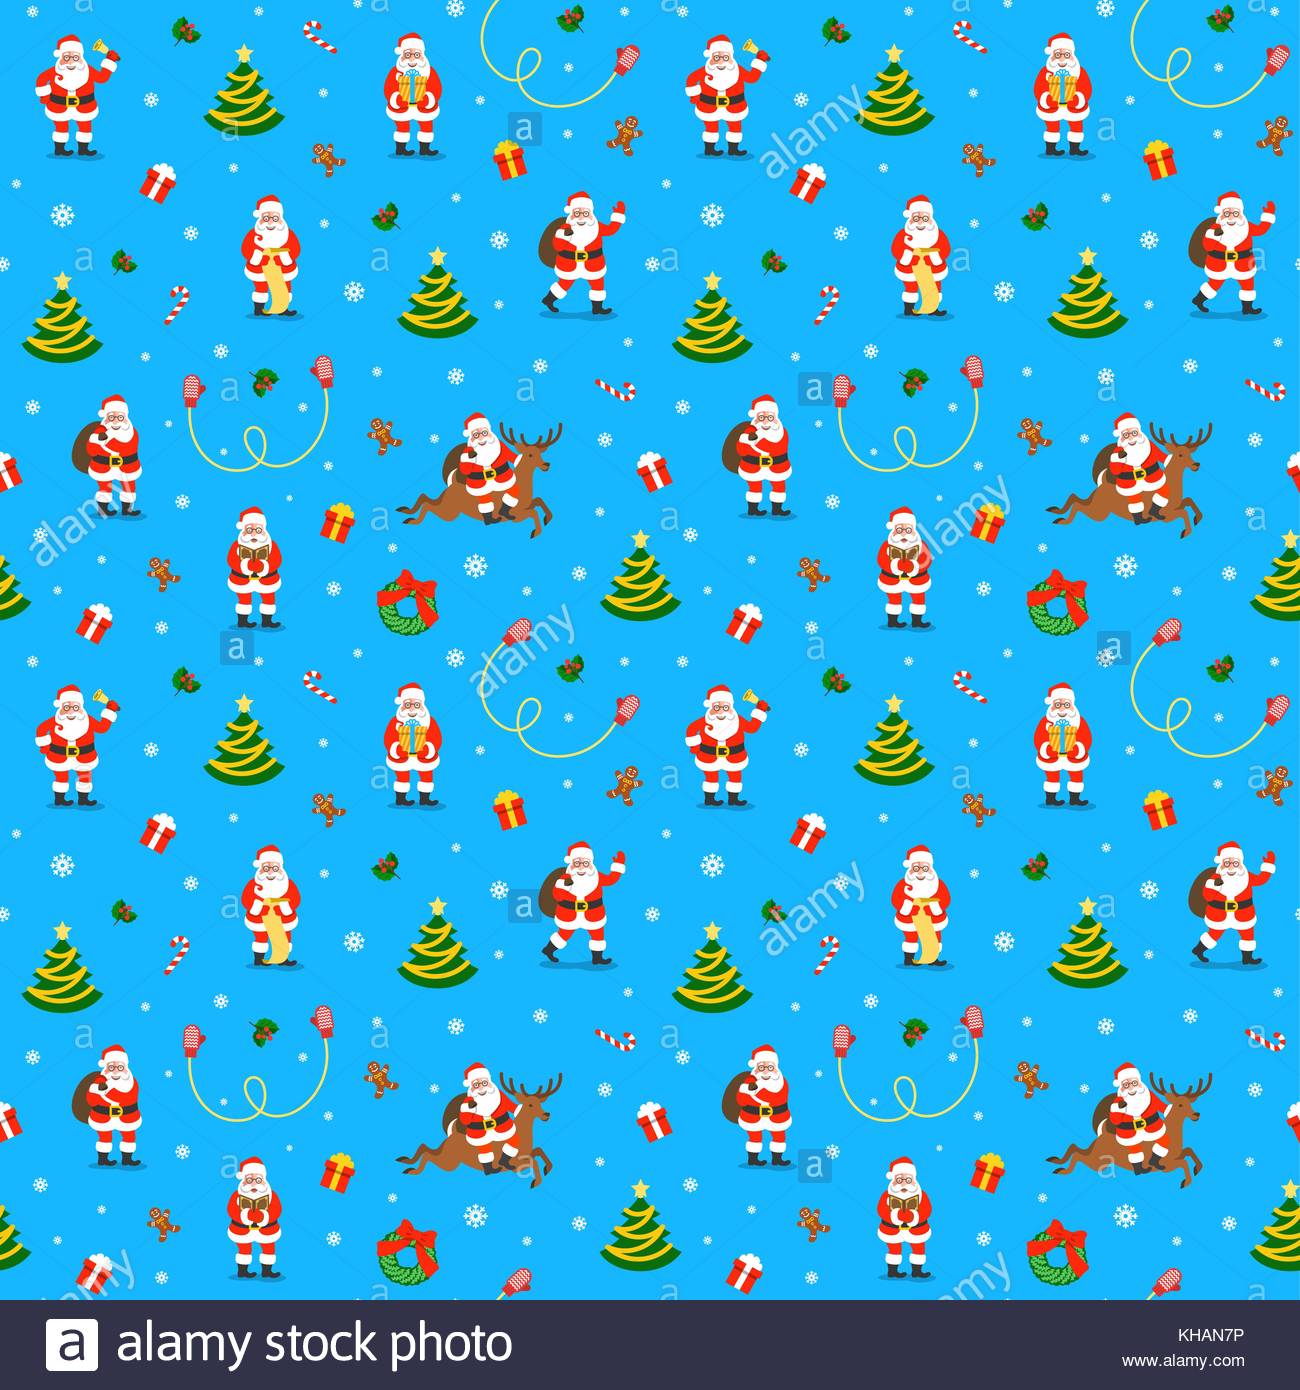 Merry Christmas Seamless Pattern With Funny Santa Claus In